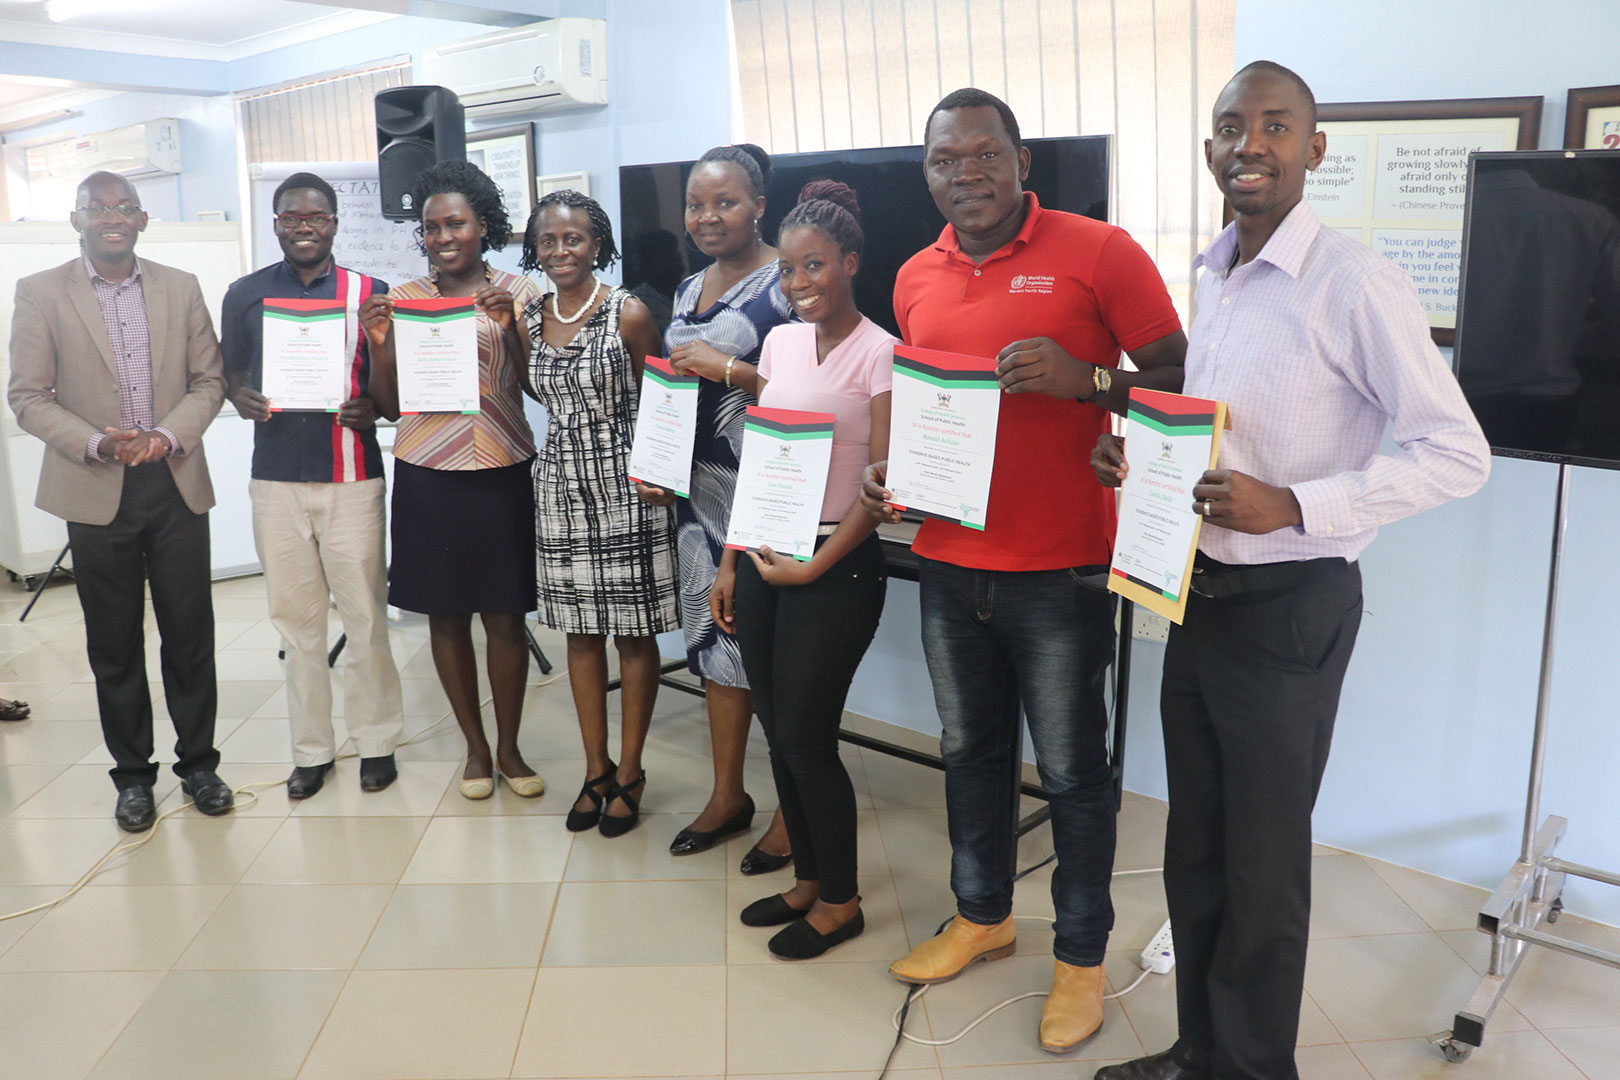 Some of the participants pose for a group photo after receiving their certificates